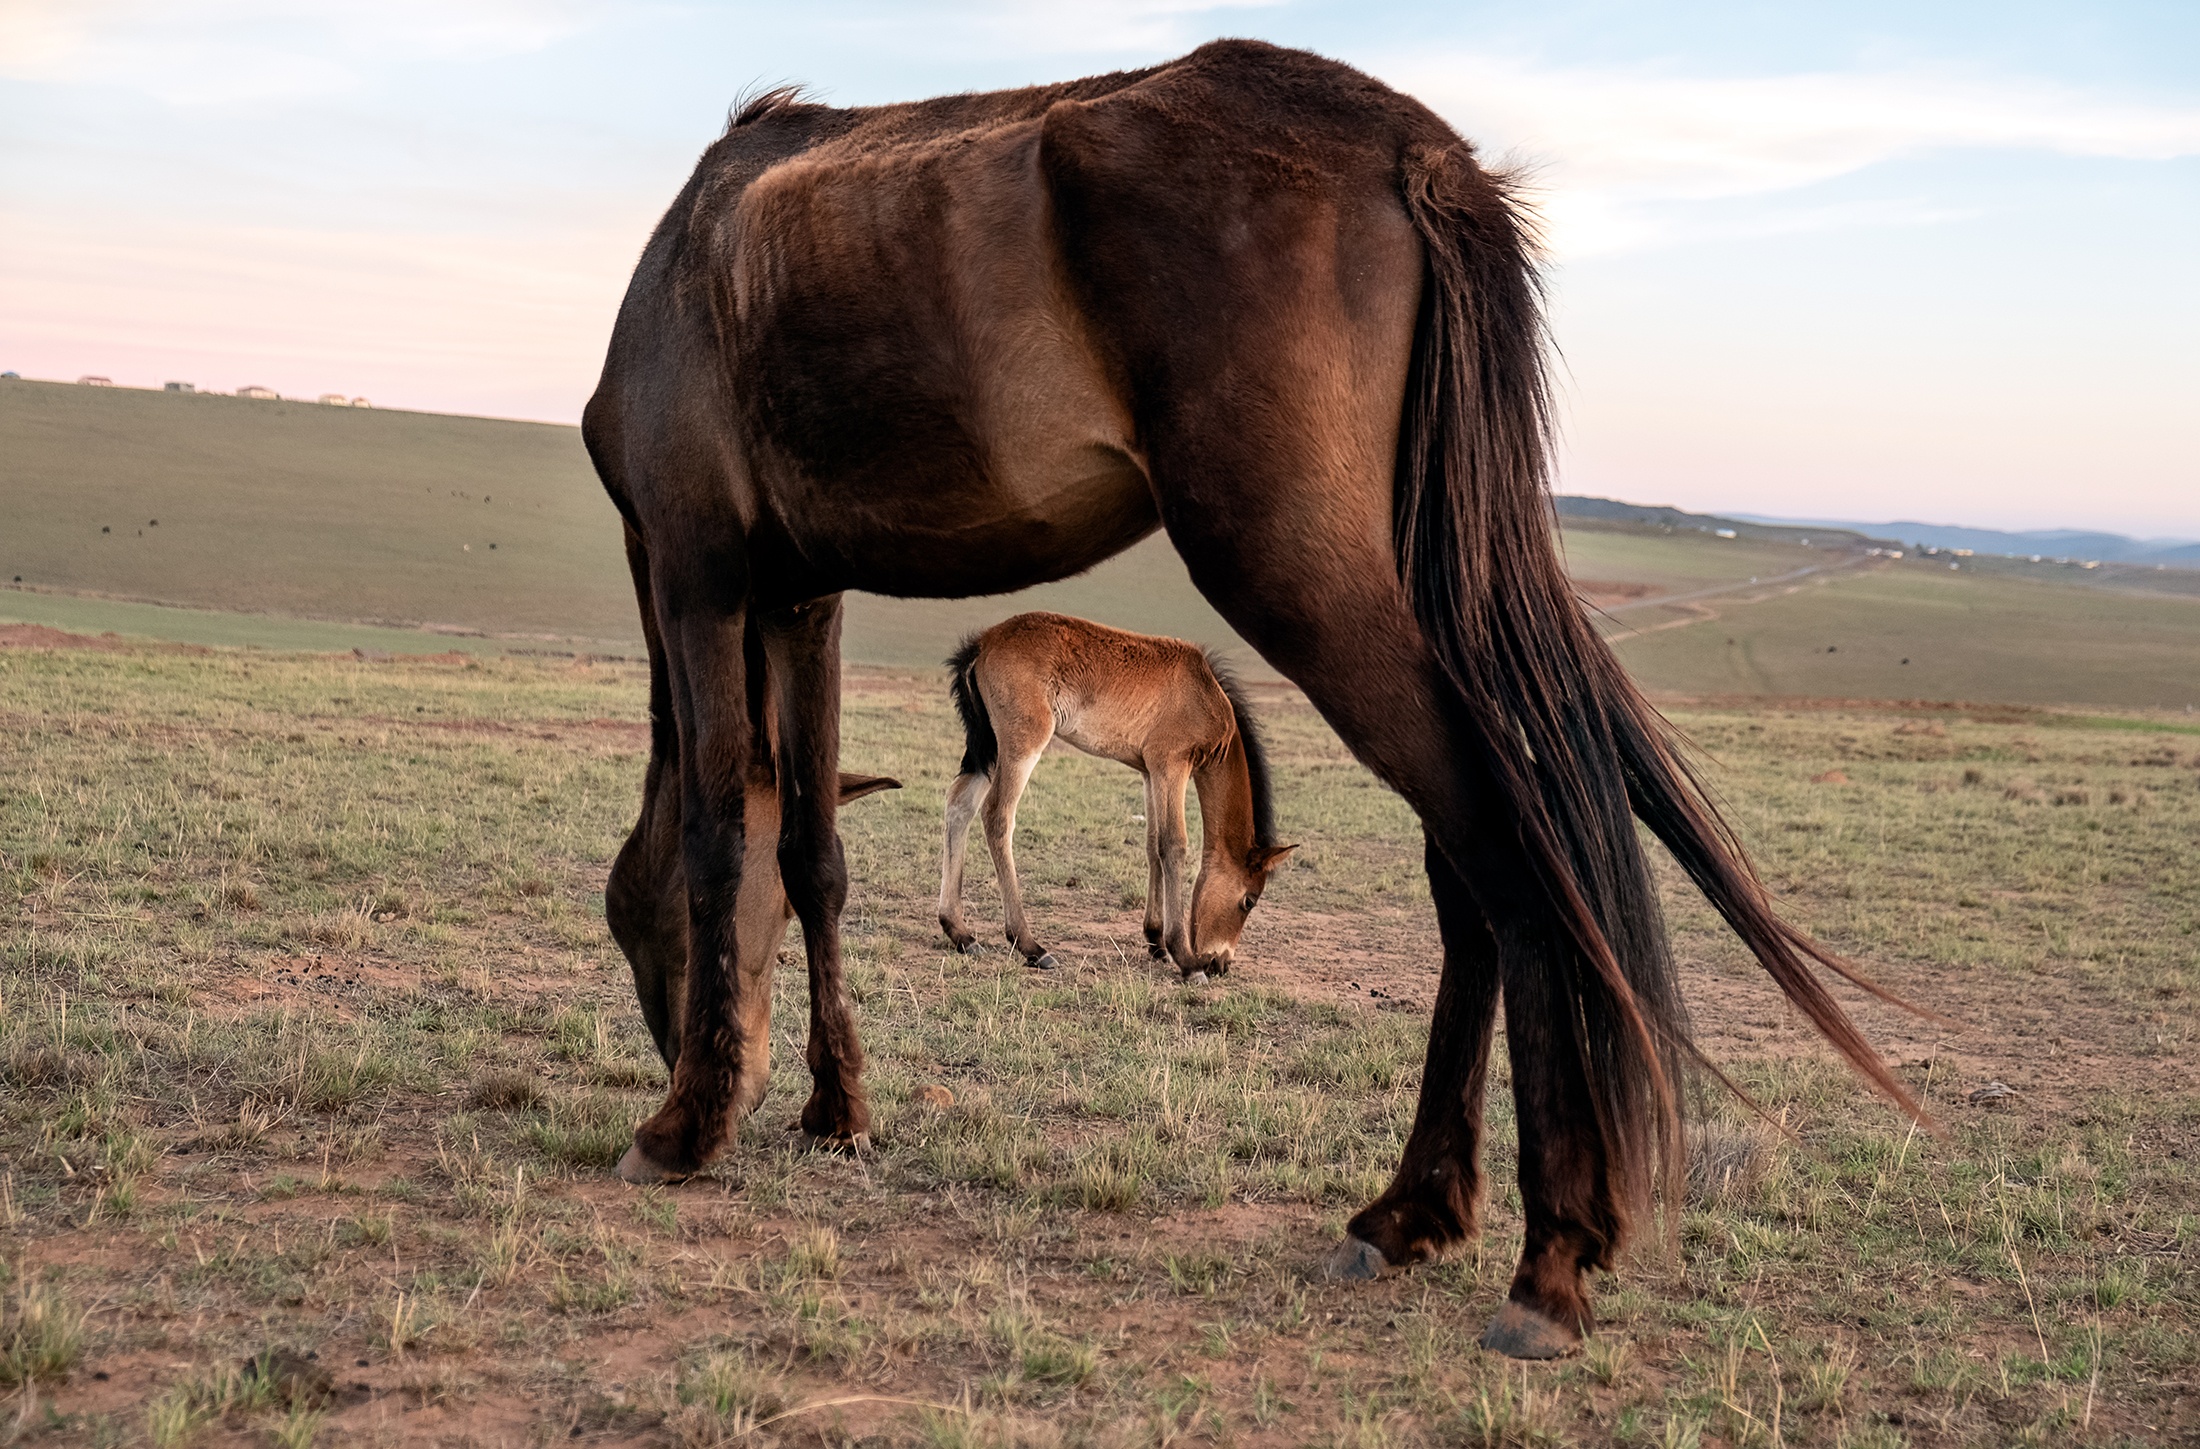 Lindokuhle Sobekwa's photograph 'Bhayi alembathwa lembathwa ngabalaziyo' shows an adule horse eating grass at the front, with a foal eating grass at the back.
